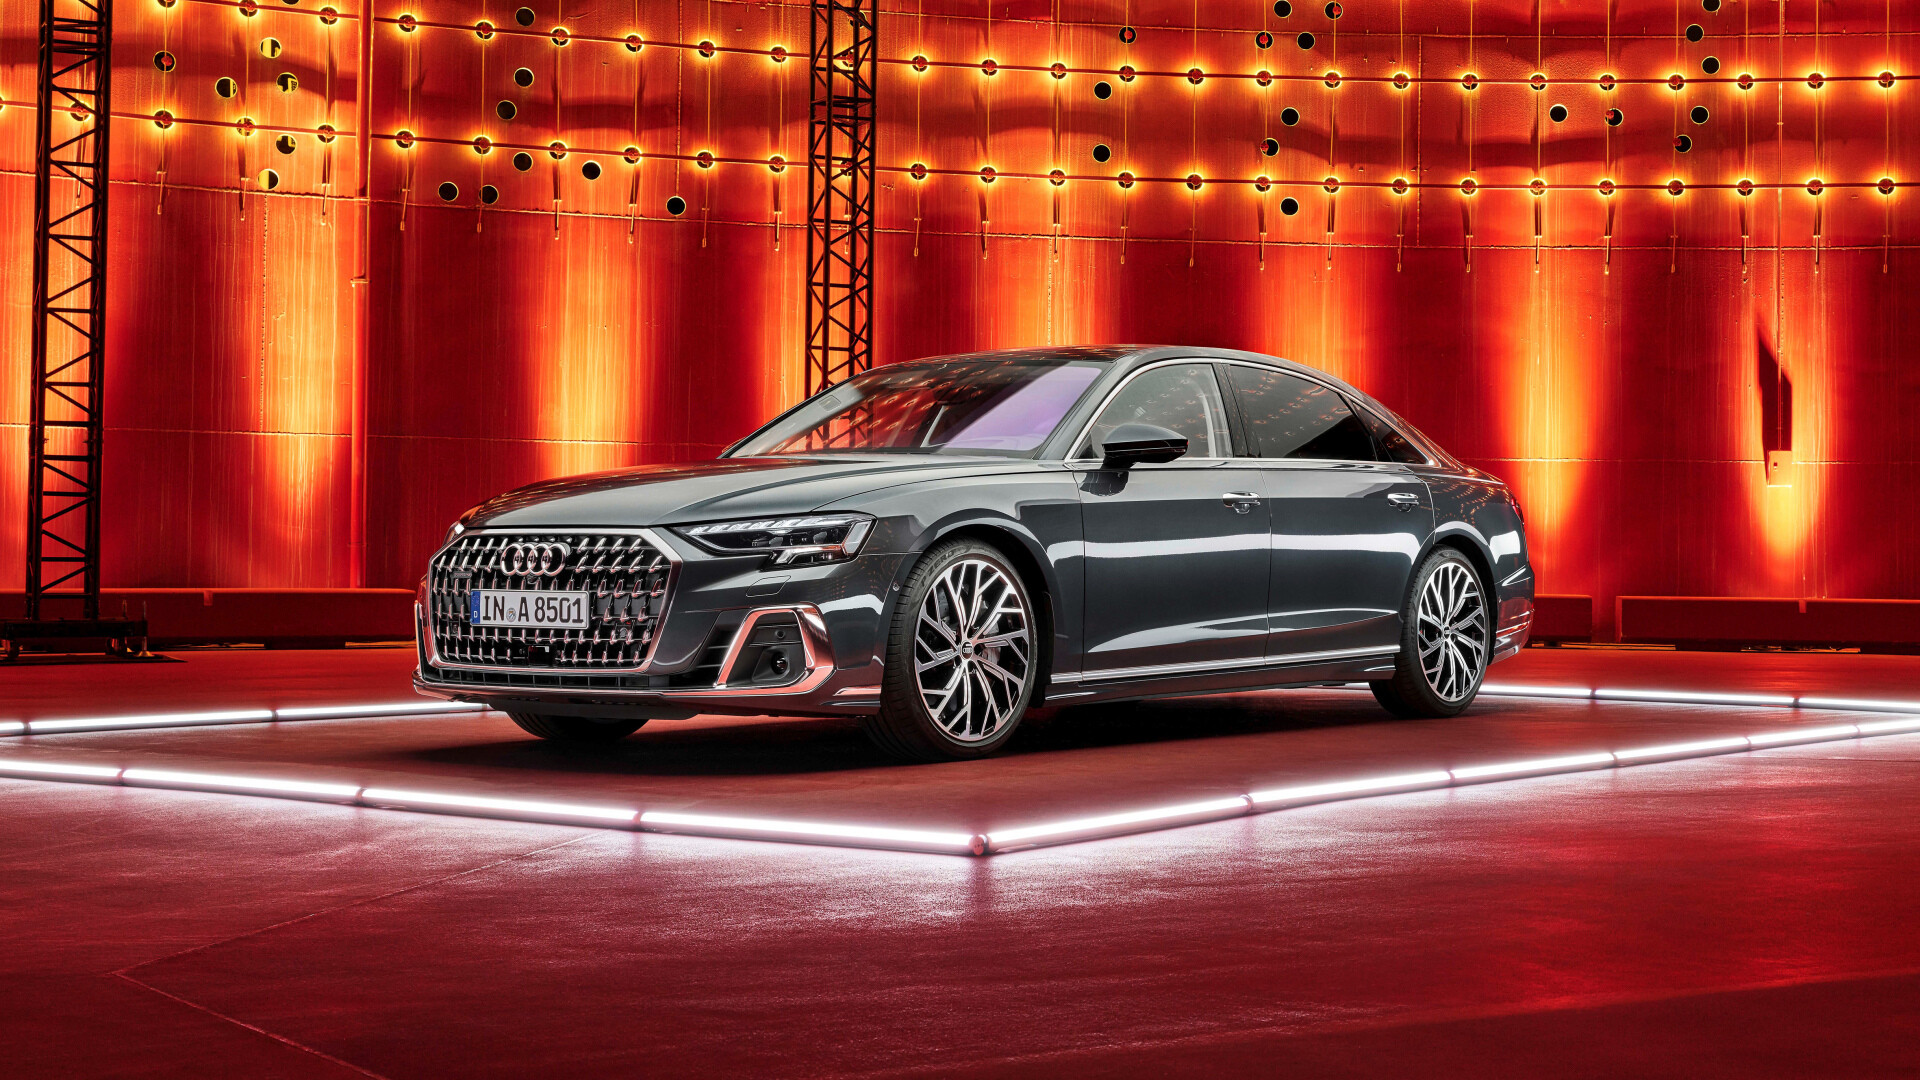 Audi A8: L 2022, Audi's flagship sedan, A new grille, re-worked front and rear bumpers. 1920x1080 Full HD Wallpaper.